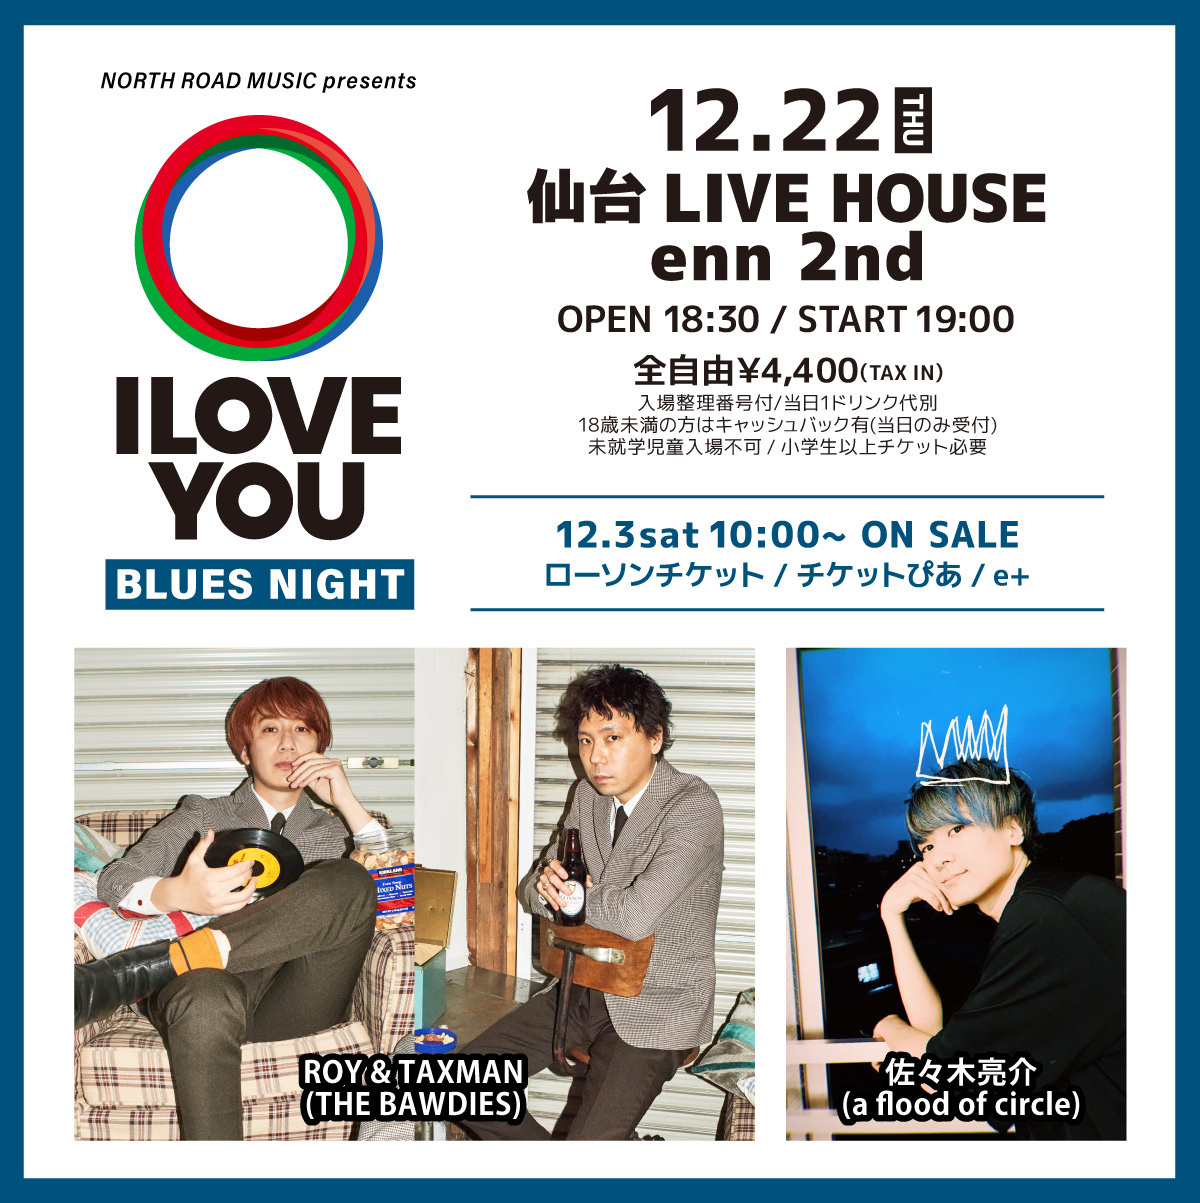 「NORTH ROAD MUSIC presents I LOVE YOU『BLUES NIGHT』」へROY & TAXMANのACOUSTIC SETでの出演が決定！